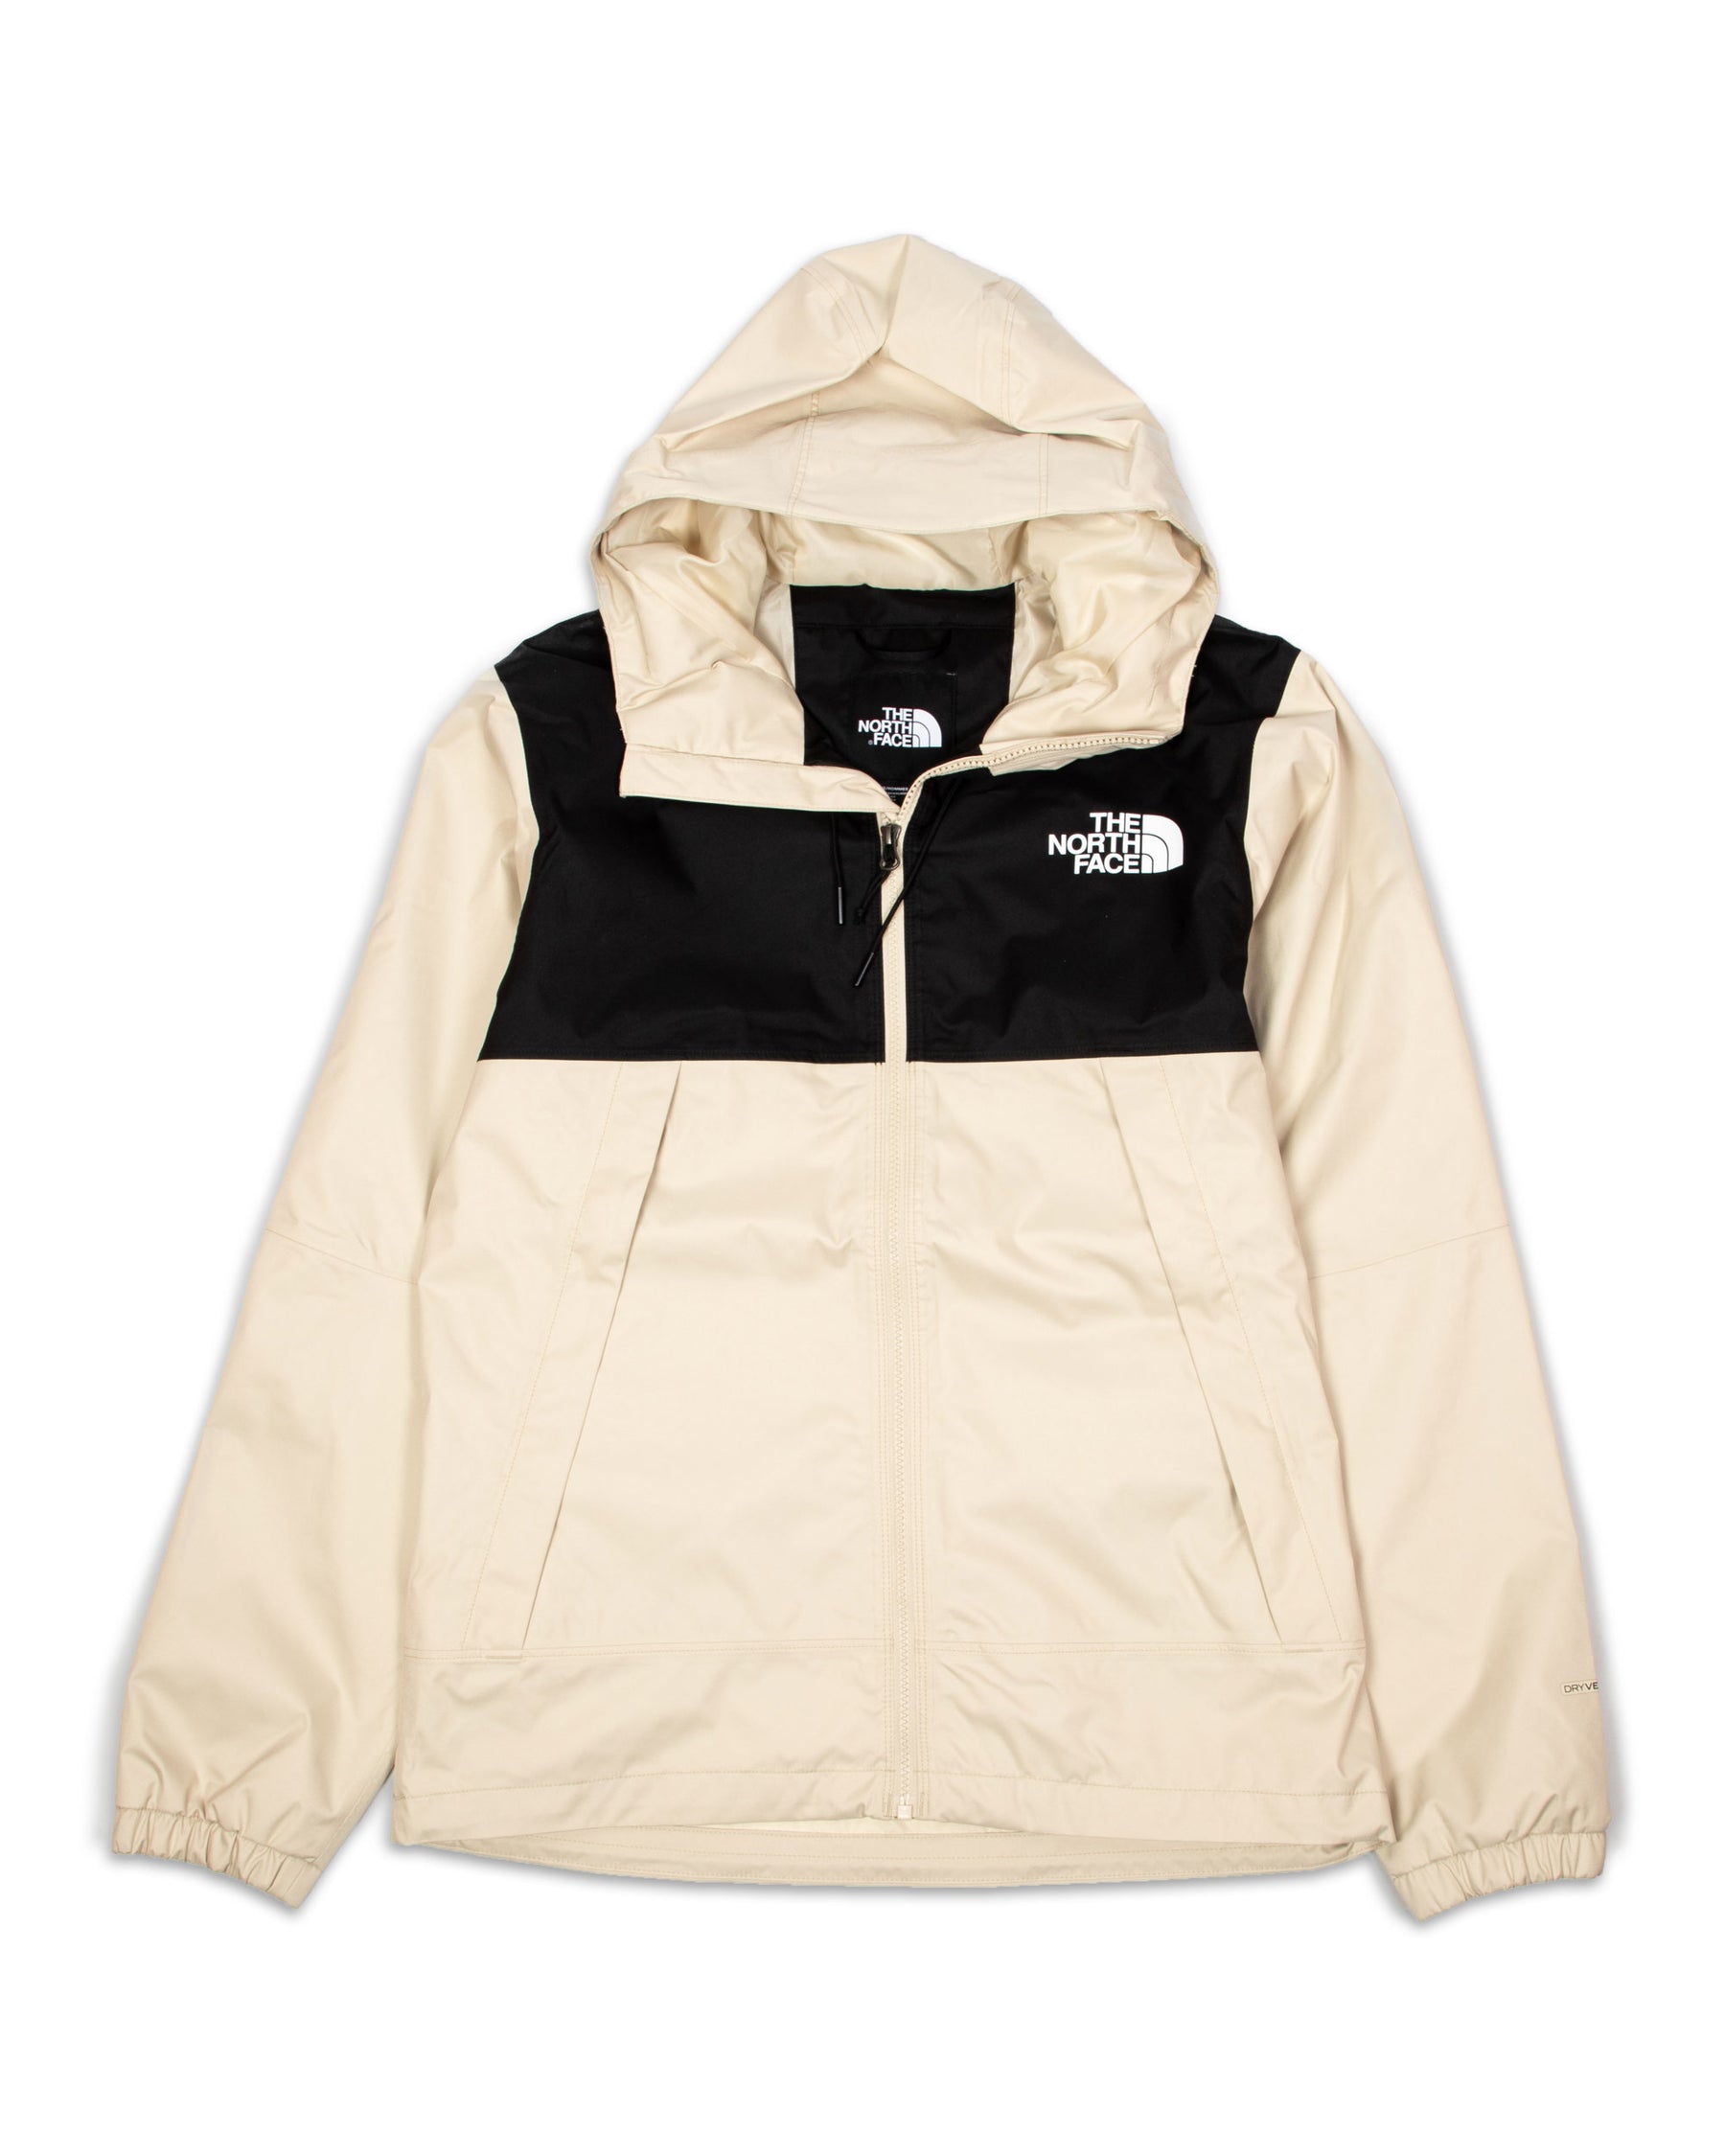 Giacca Uomo The North Face Mtn Beige